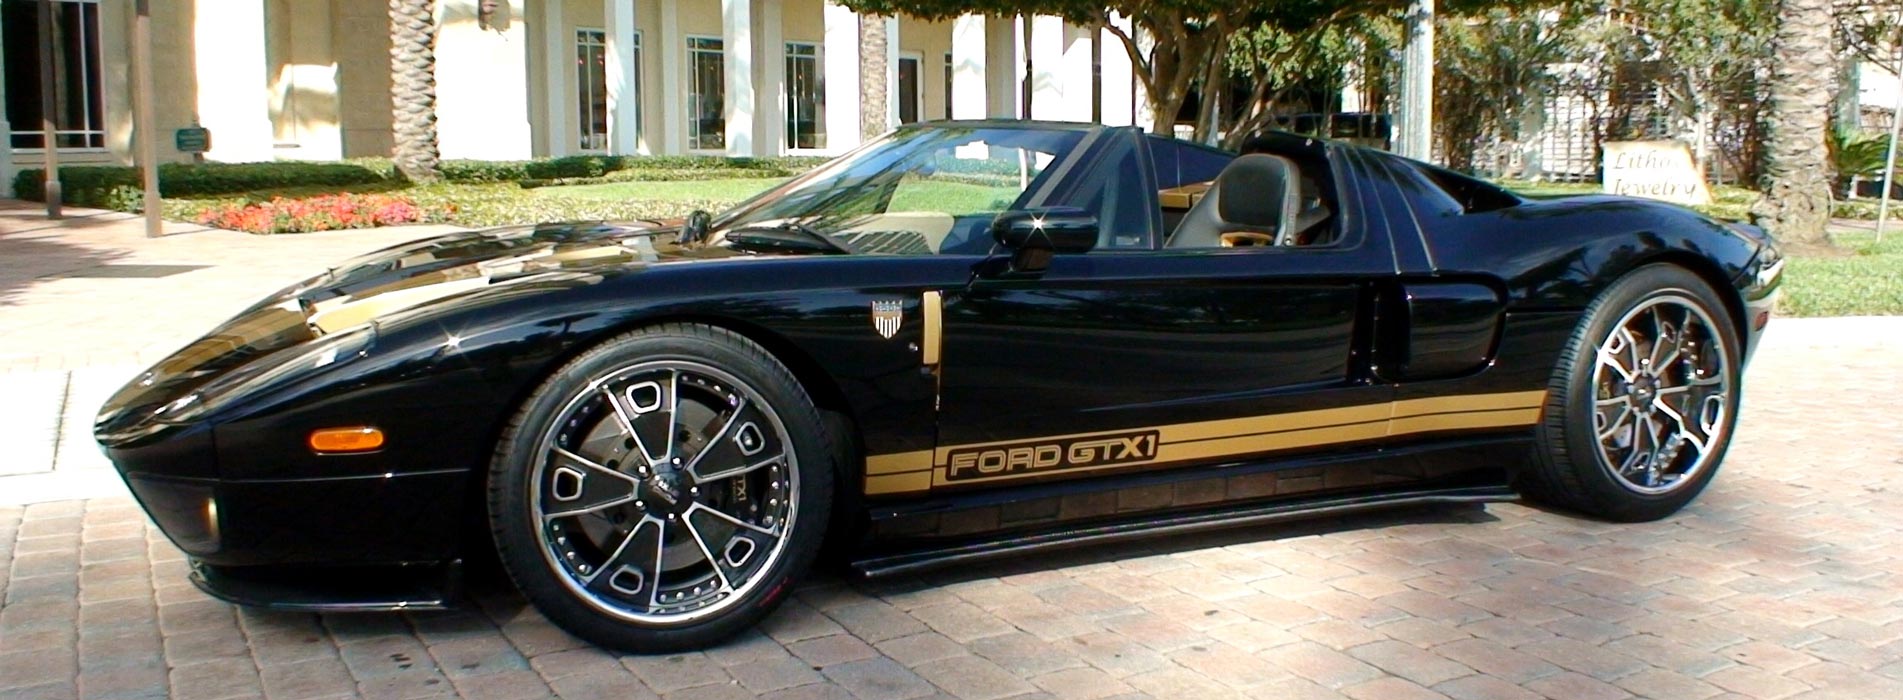 Black Ford GTX-1 with gold racing strips on bottom panel